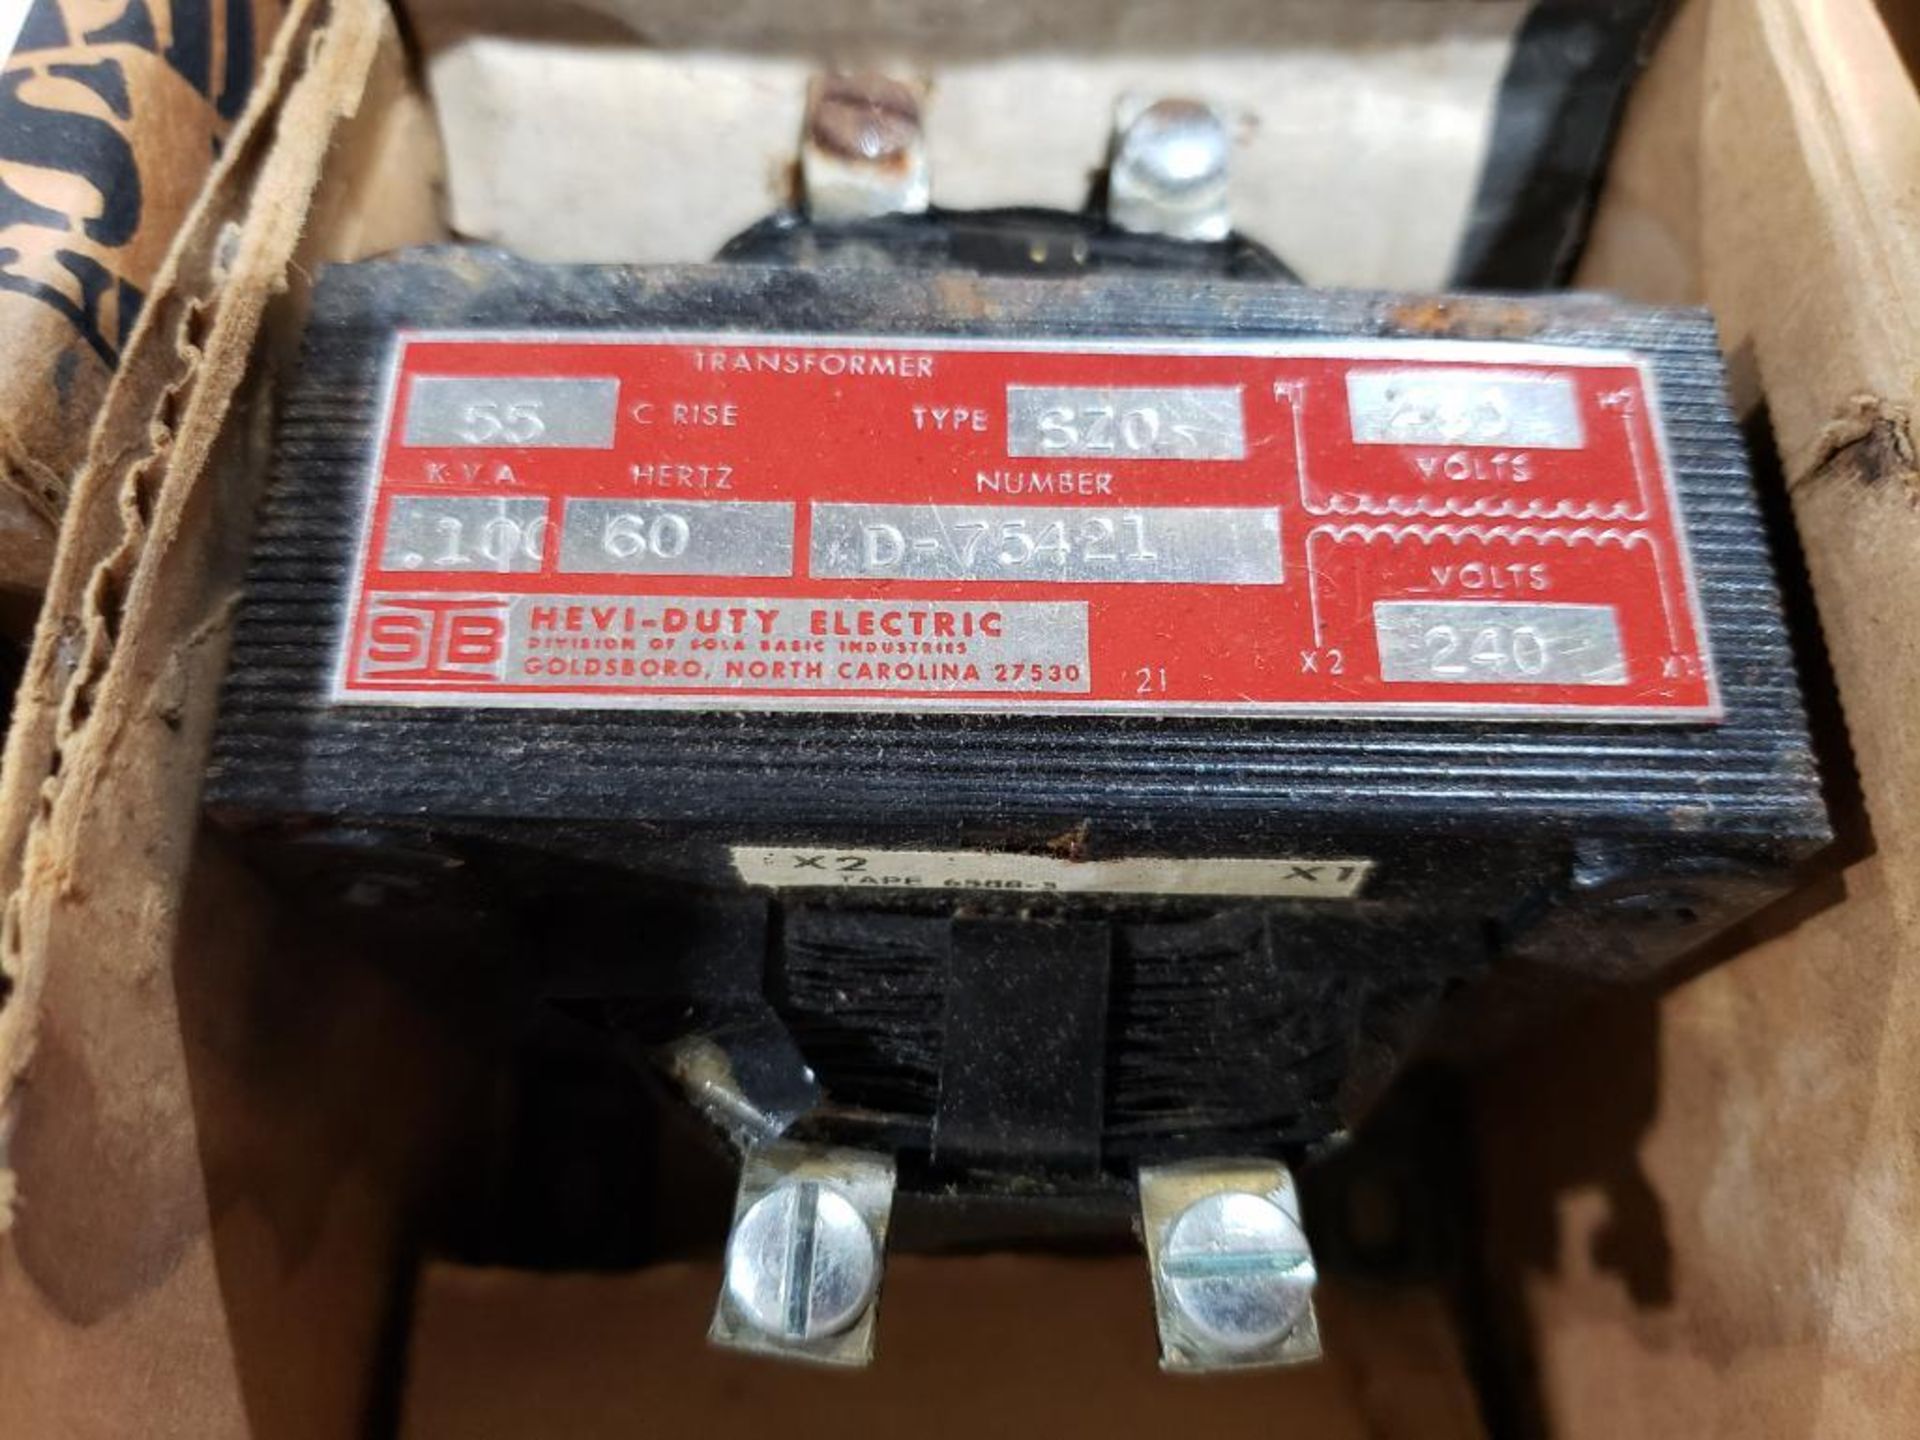 Qty 15 - Hevi Duty transformer. Part number 35DV-500-522. New in box. - Image 7 of 10